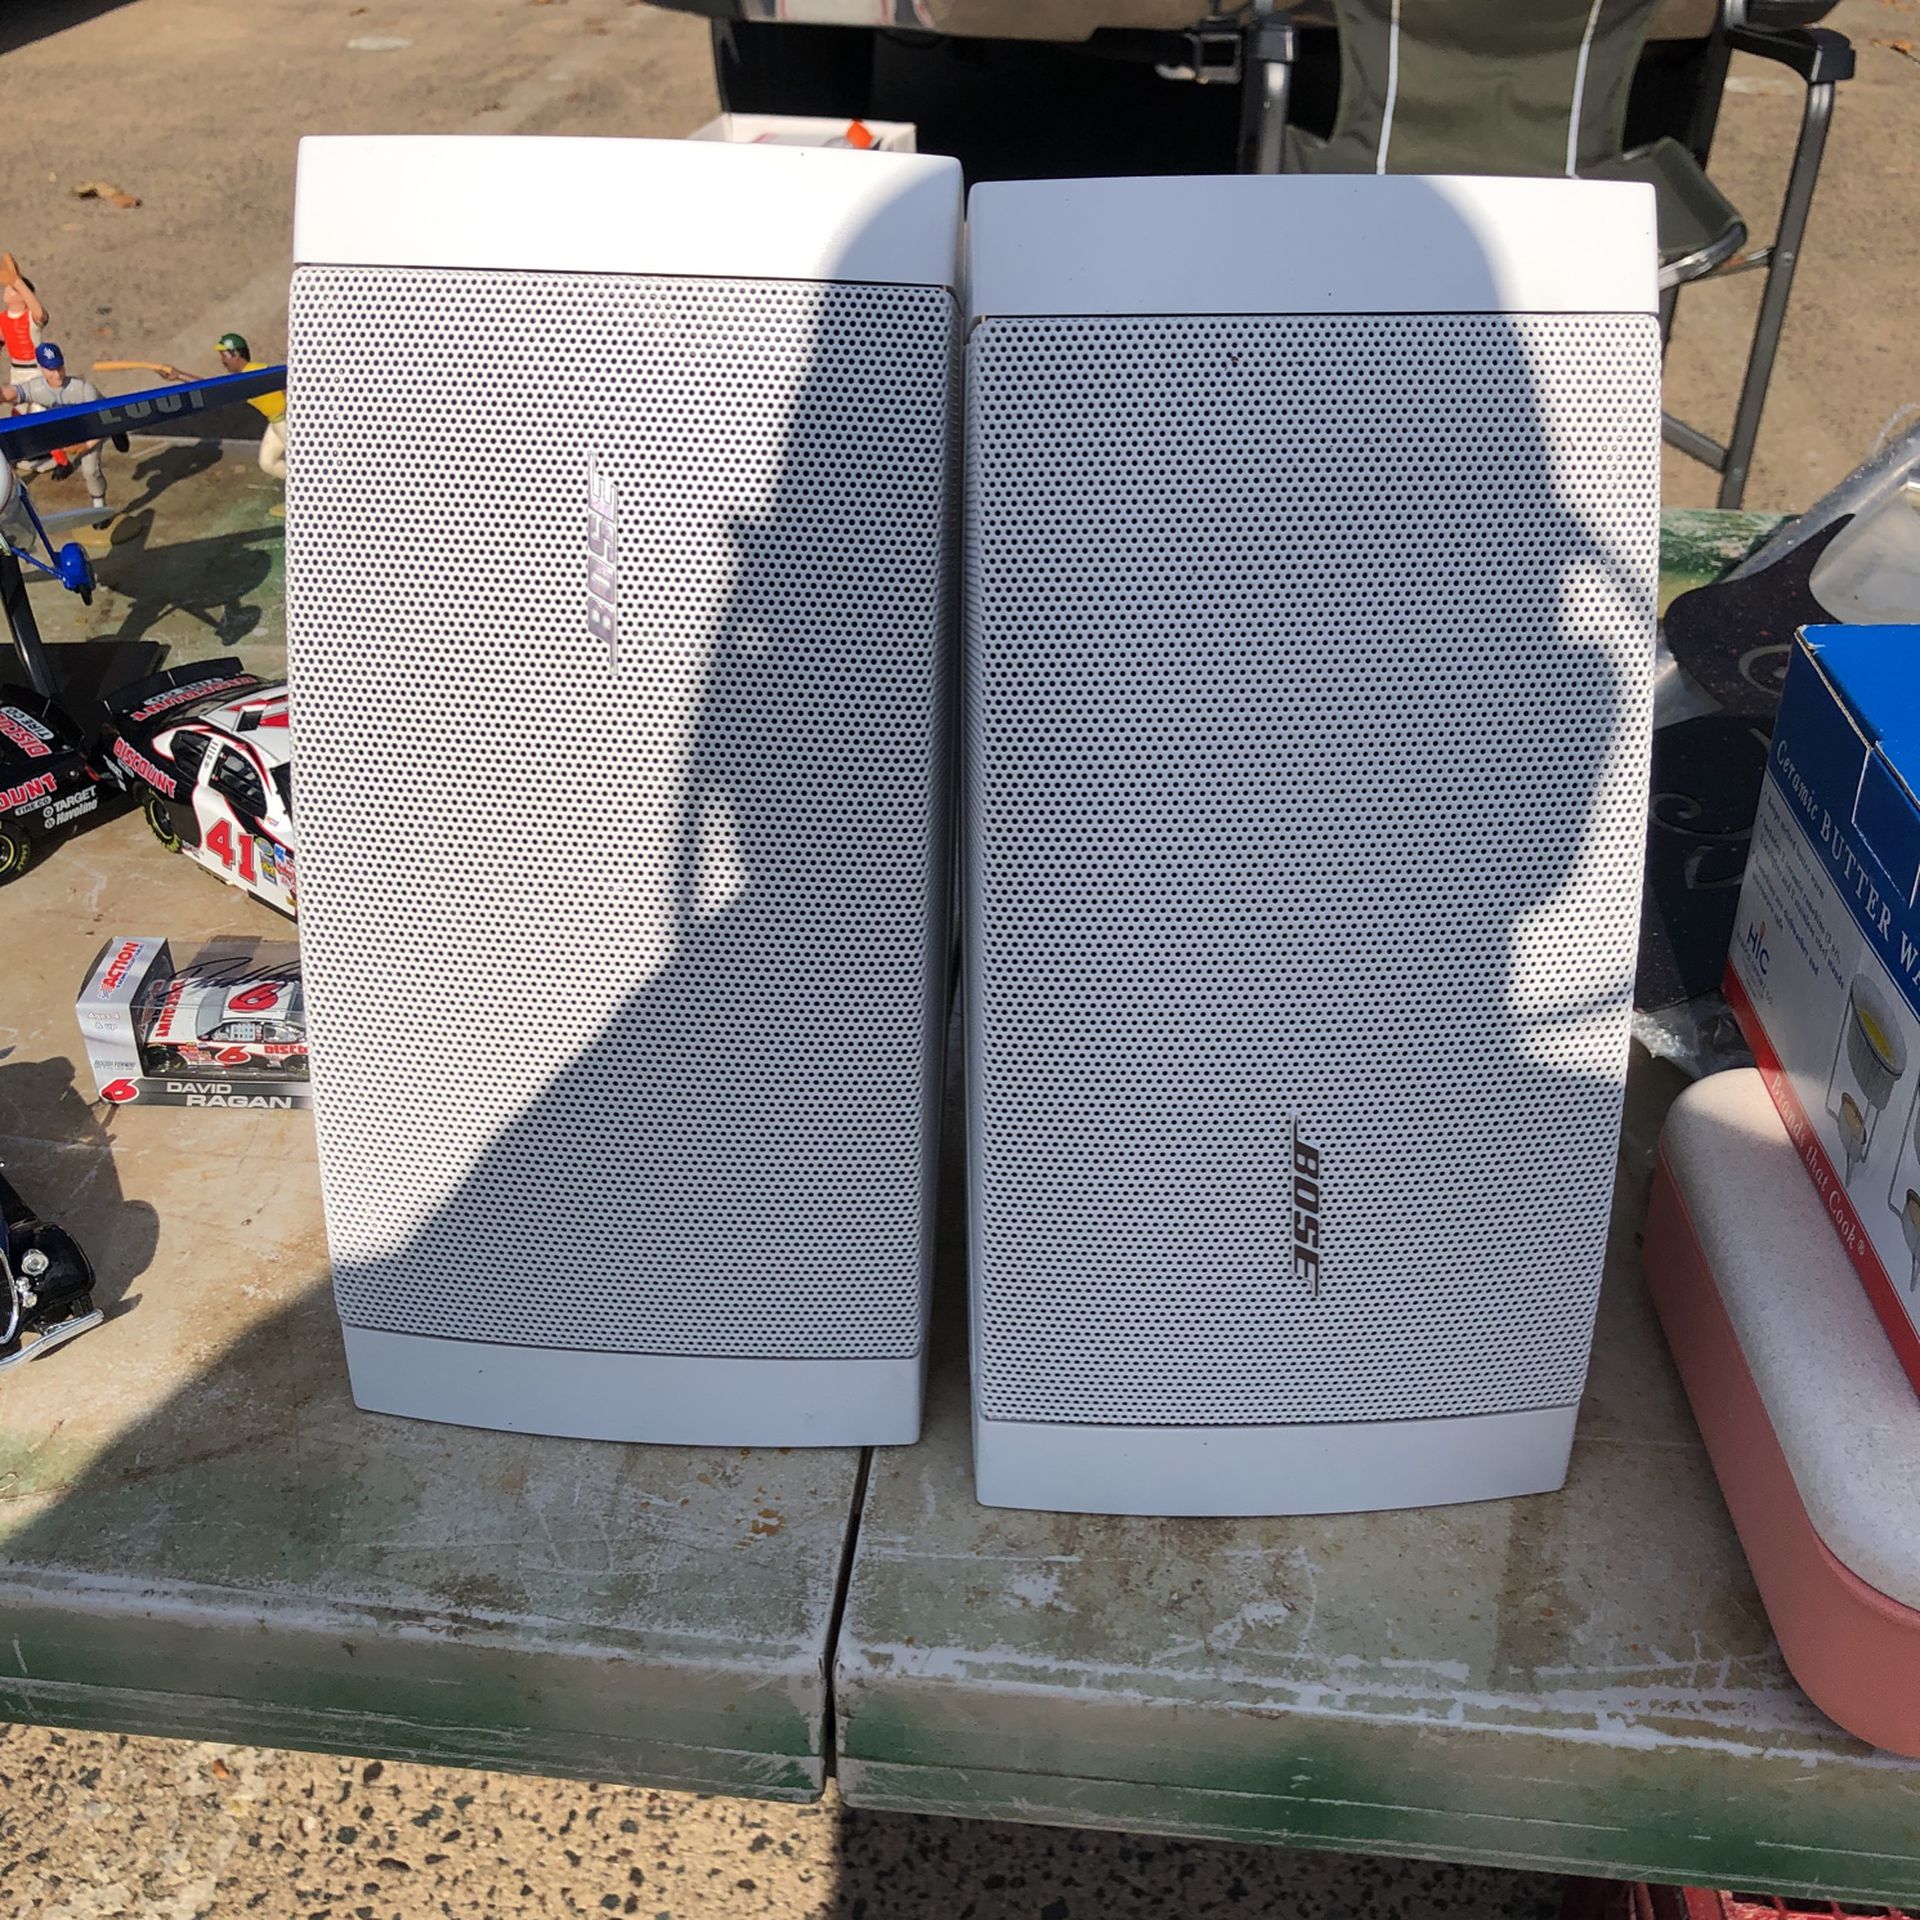  Pair Of Bose Speakers $100. OBO for Both!